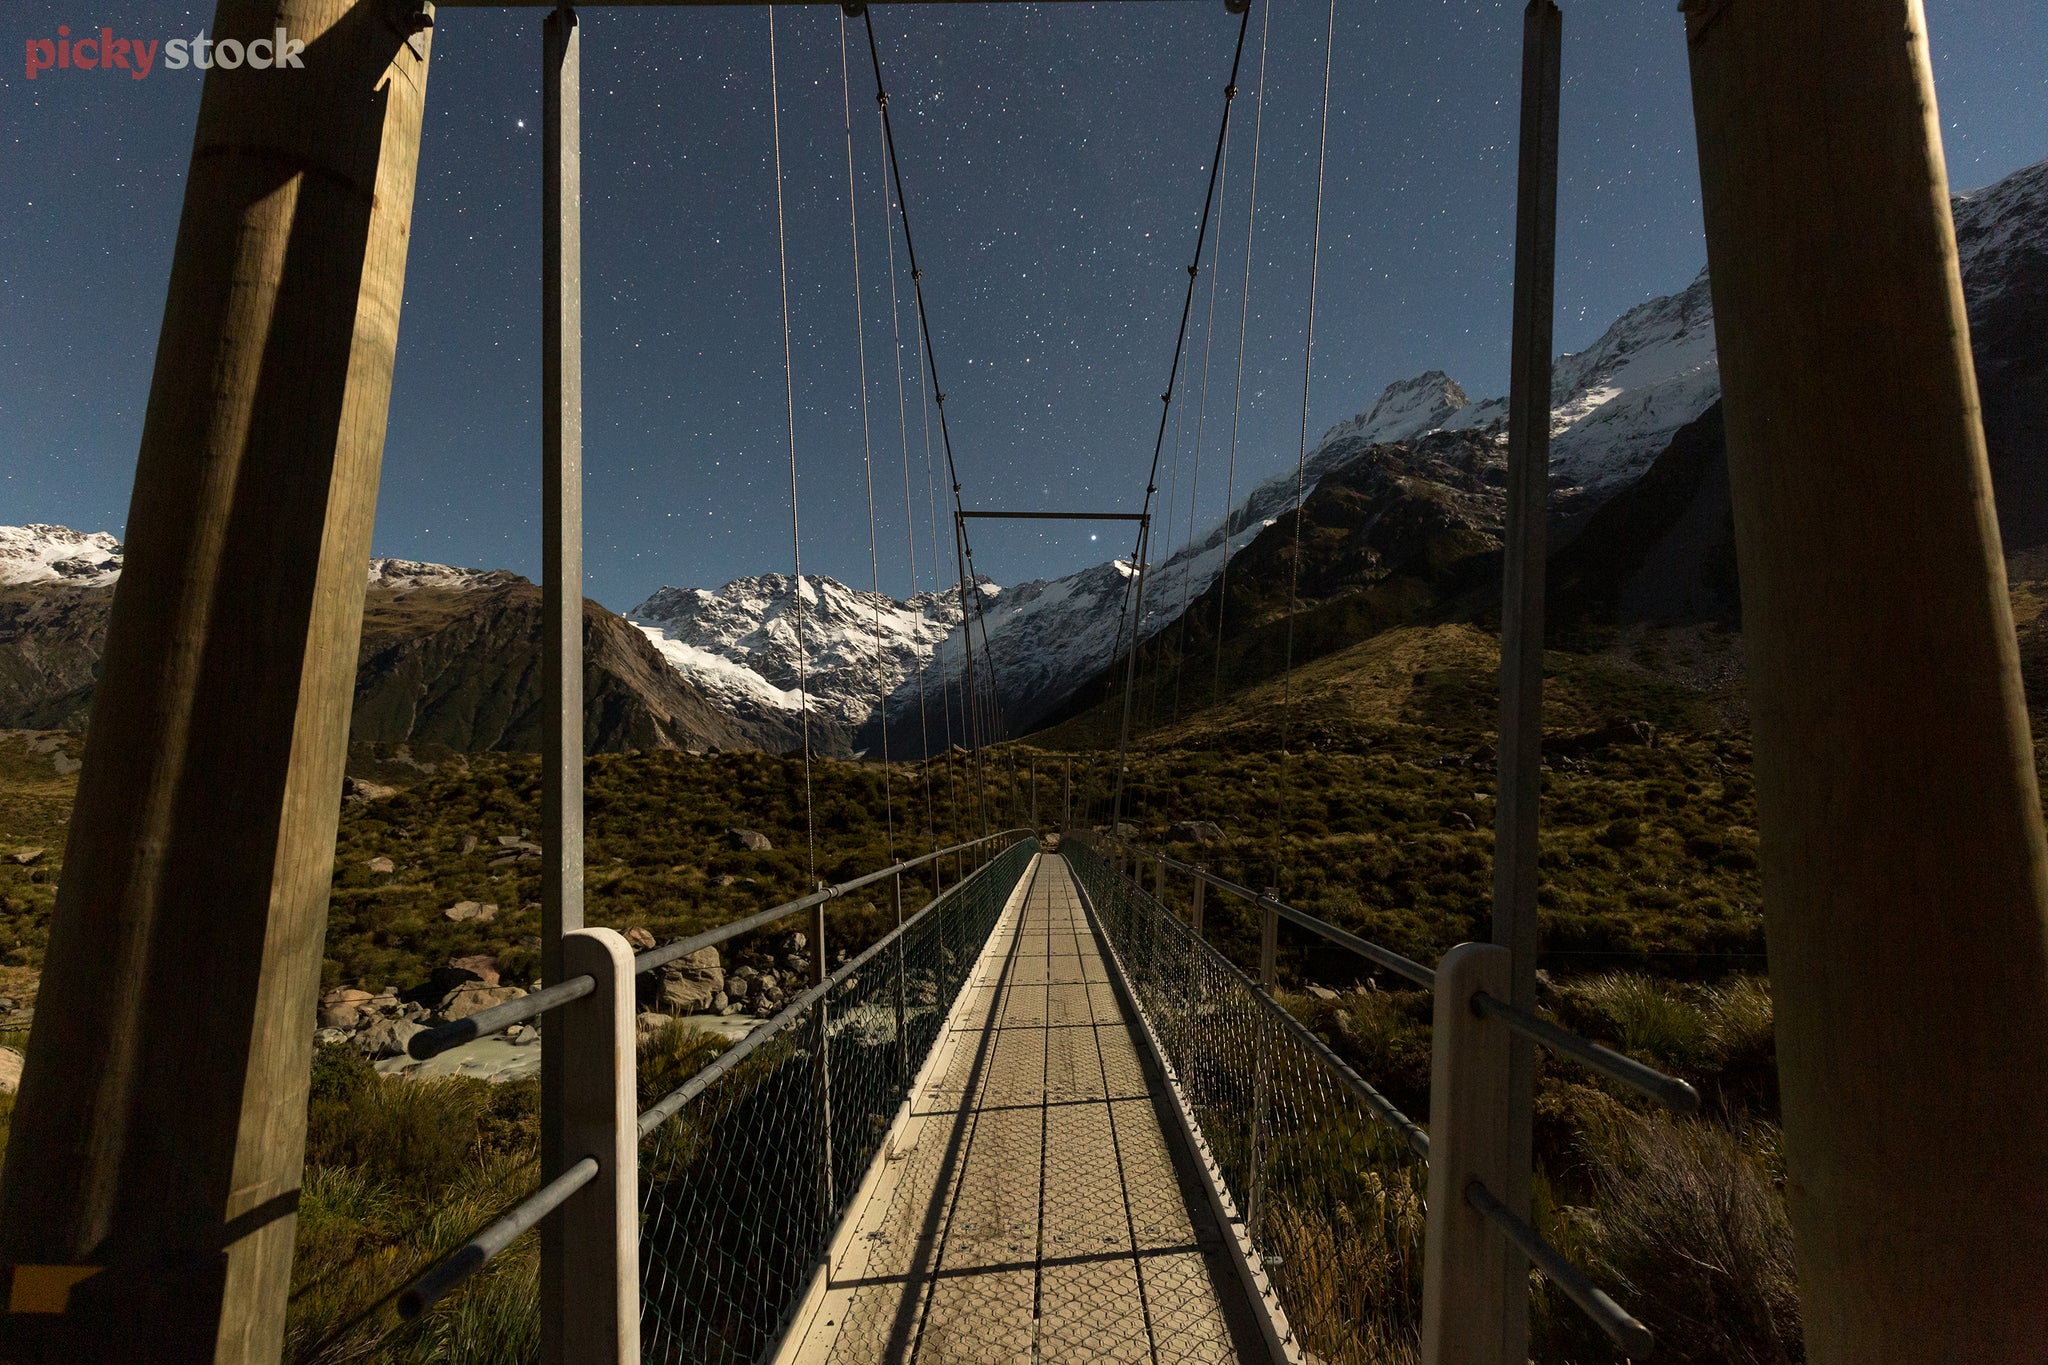 Crisp, high definition image looking over a very symmetrical hikers bridge towards the starry night sky. Snow-capped mountain range can be seen in the background. 